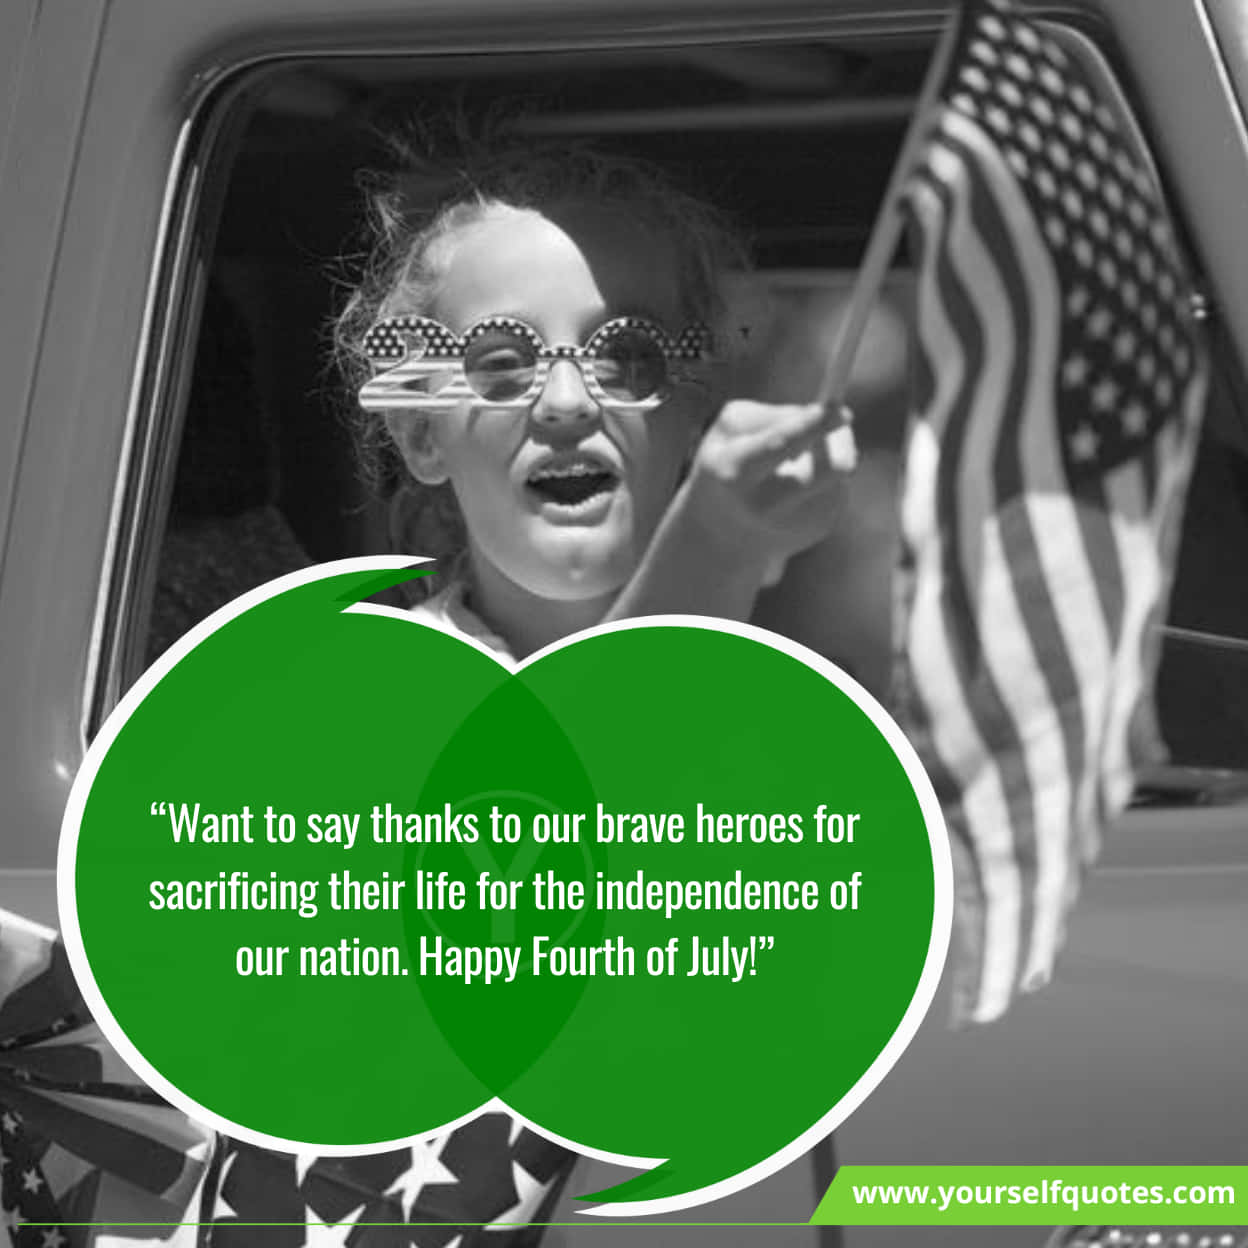 Best Sayings For Happy 4th of July